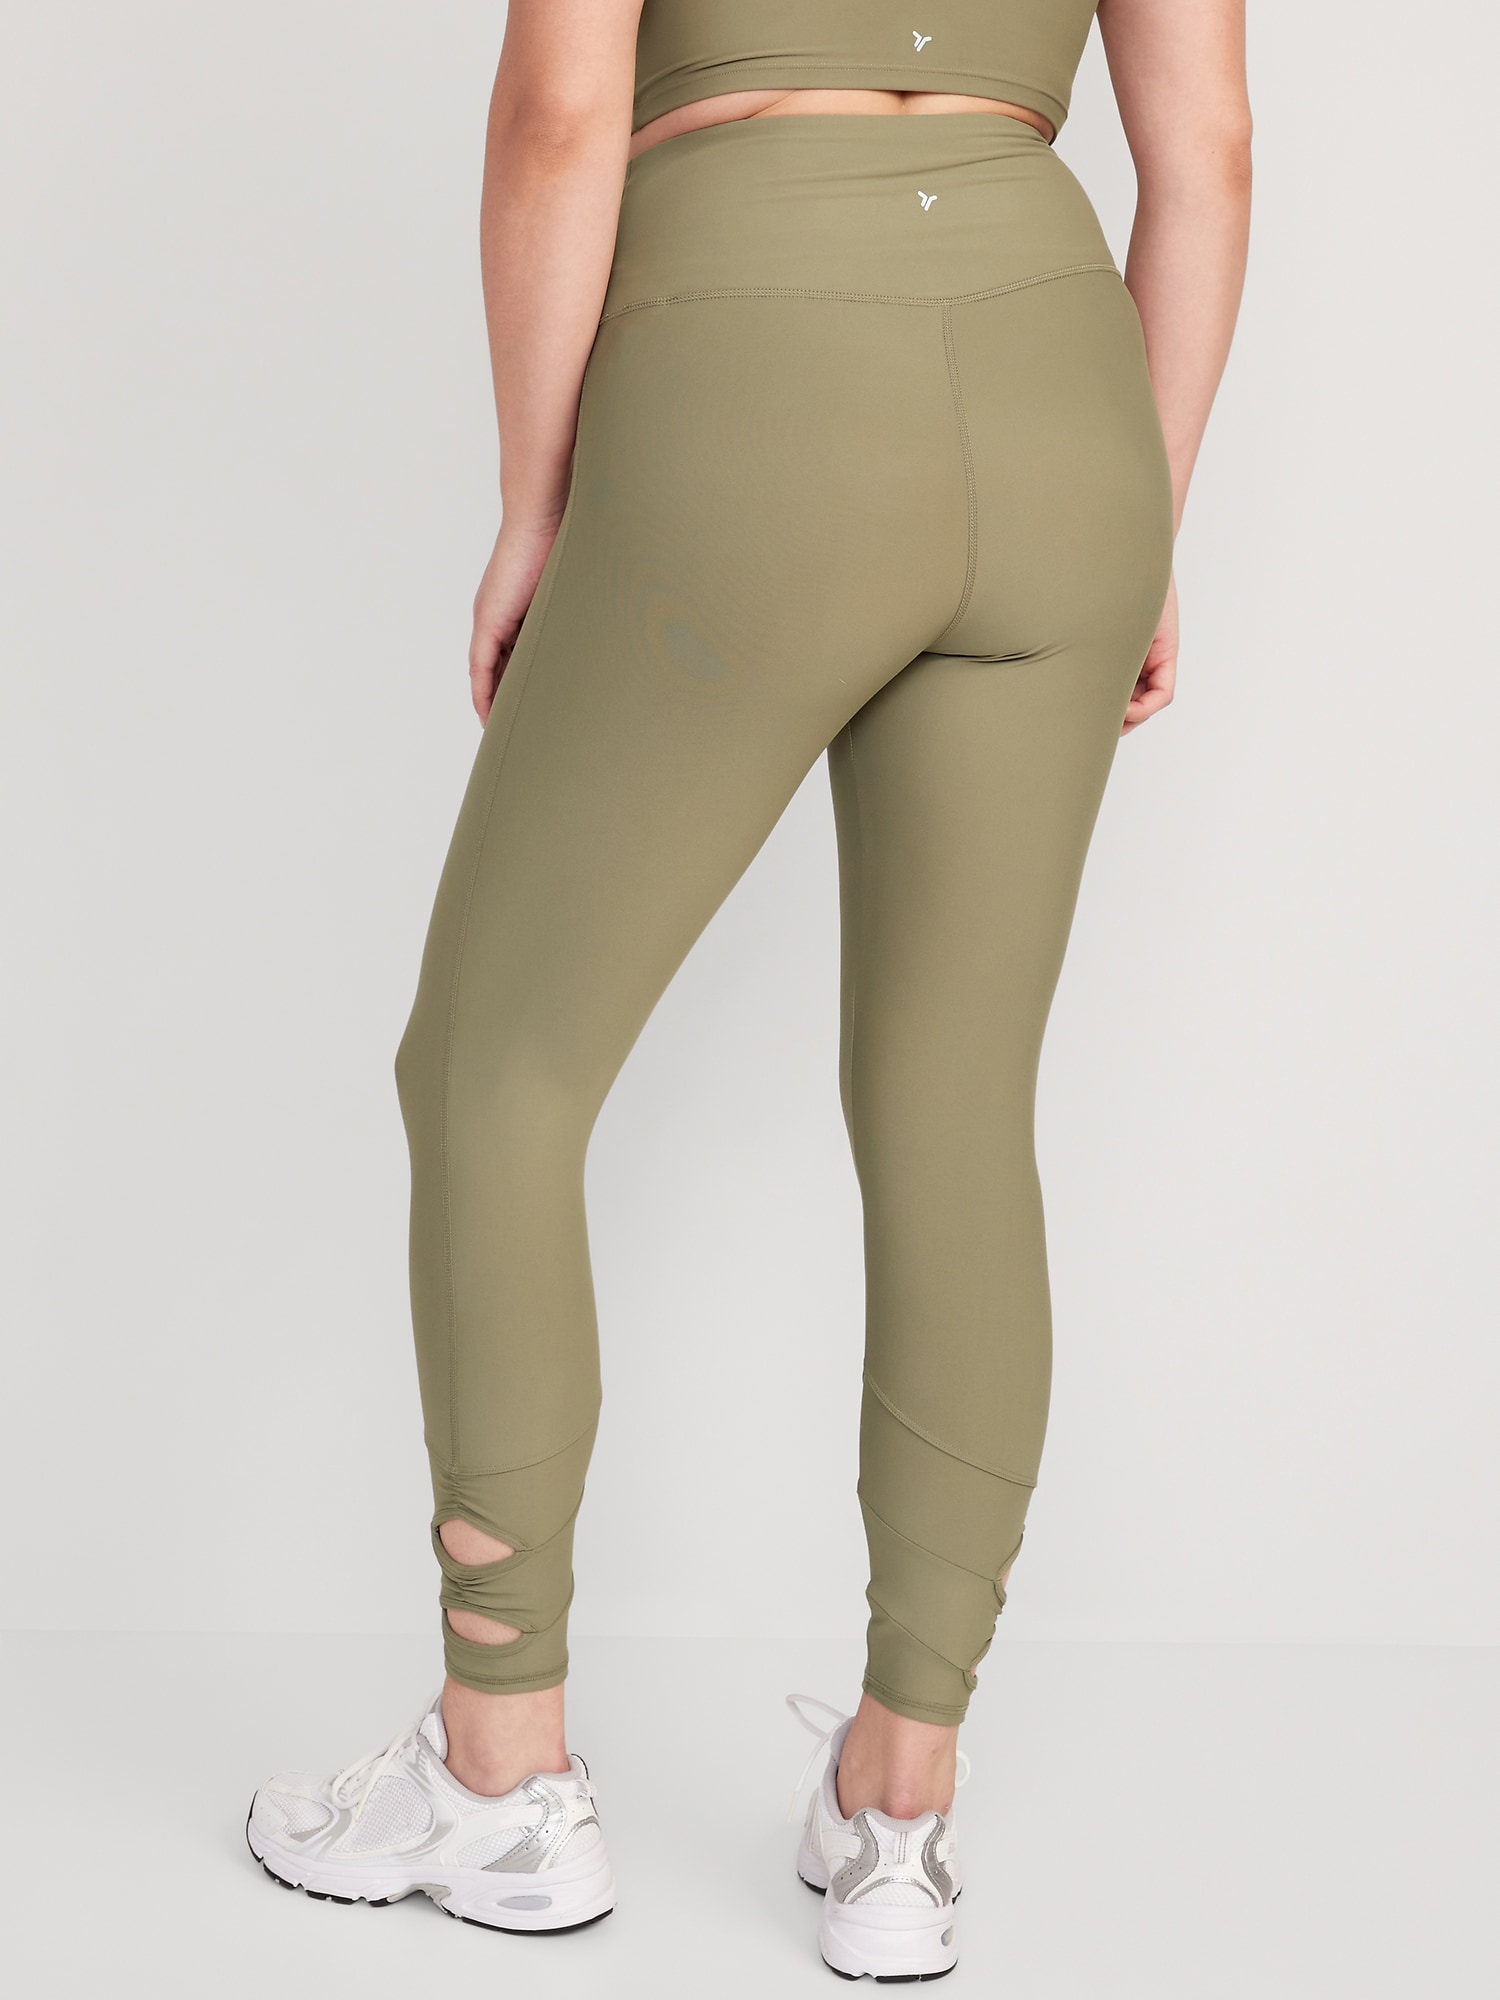 Old Navy High Waisted Powersoft Athletic Leggings 7/8 Briny Water Green XL  NEW